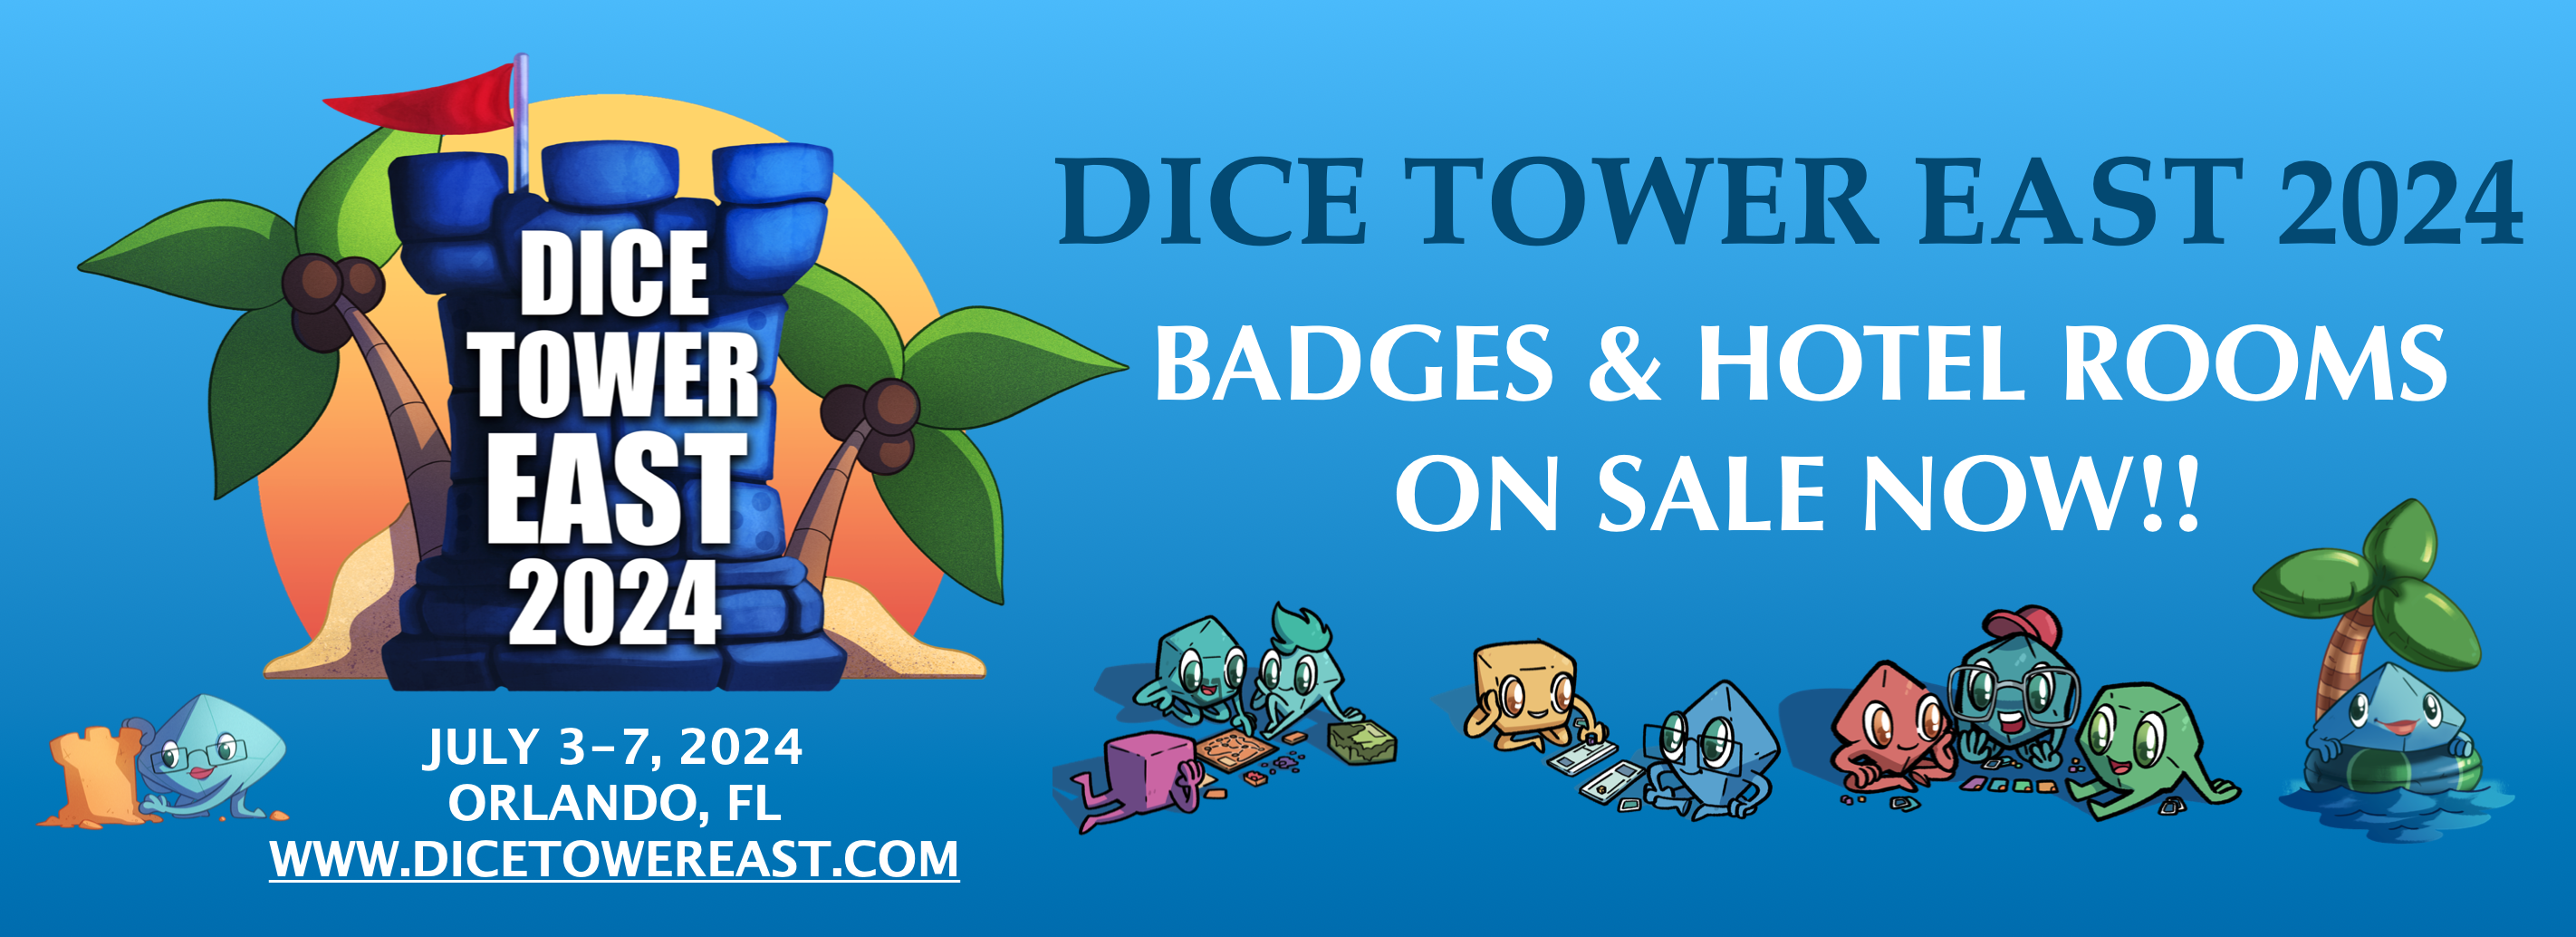 Dice Tower East 2023 Badges and Hotel Rooms on Sale Now!